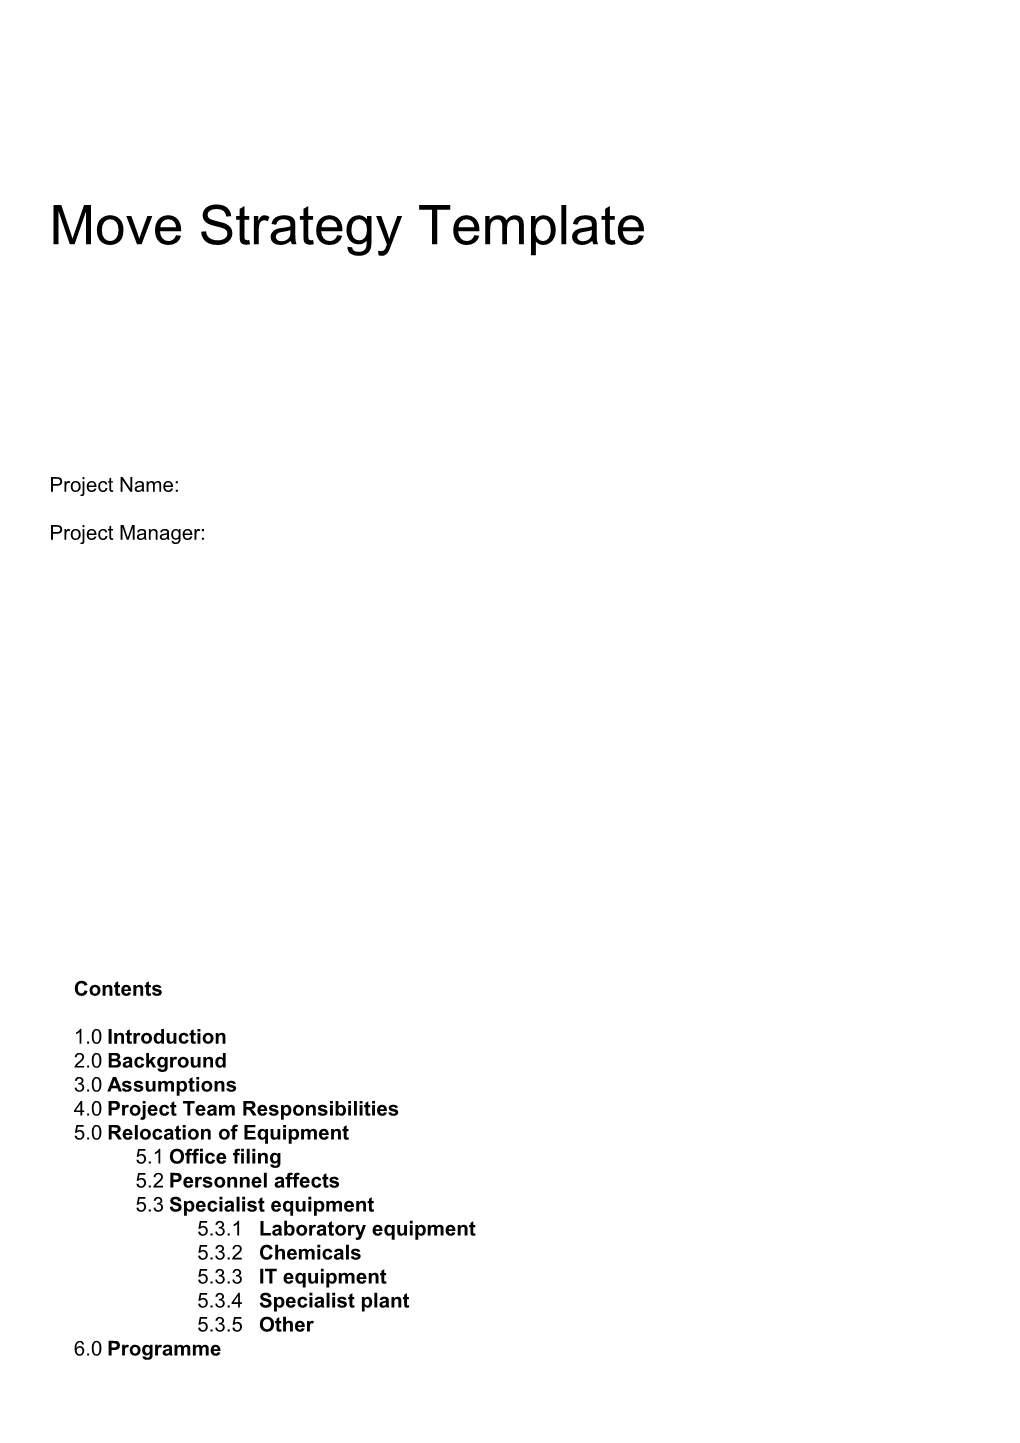 Move Strategy Template